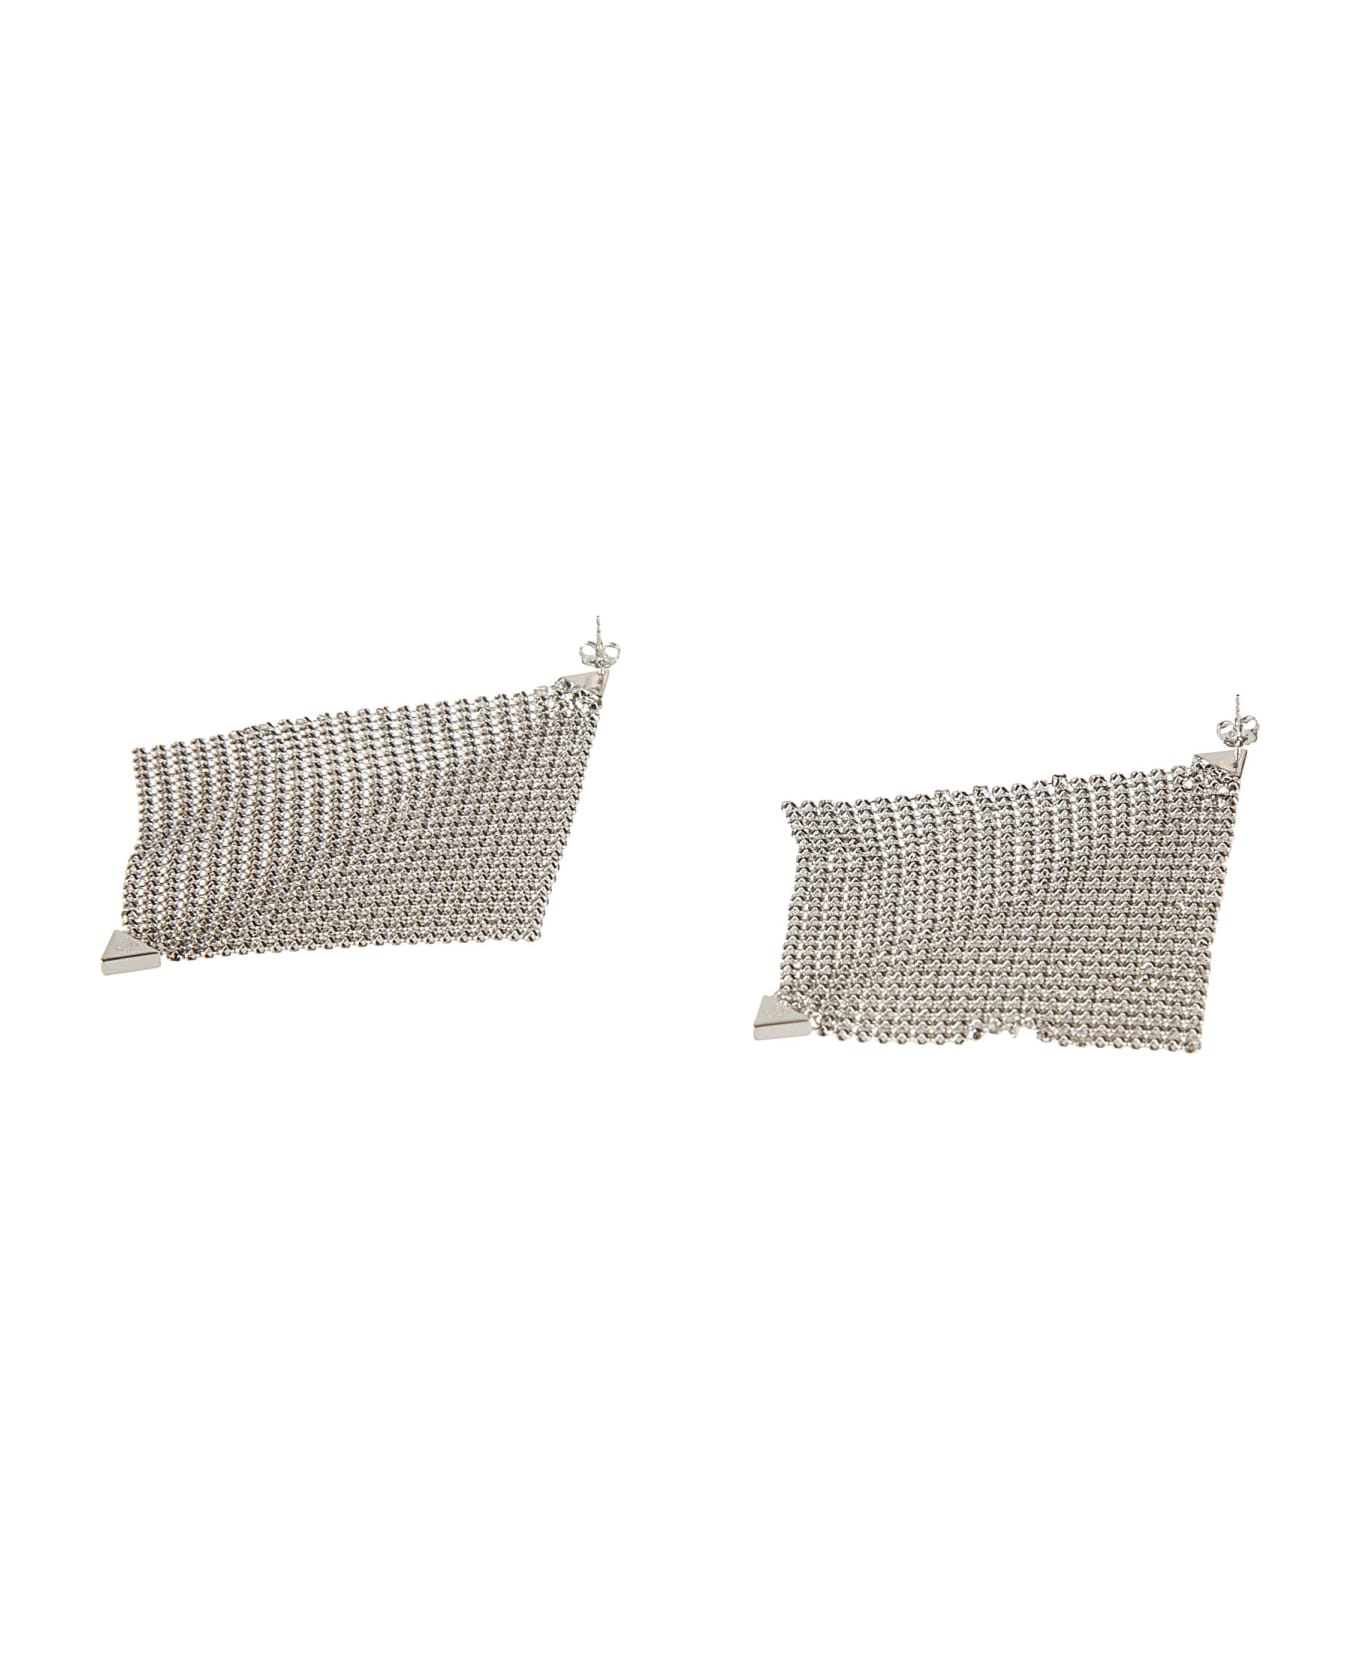 Paco Rabanne Diamond Pattern Perforated Earrings - Silver